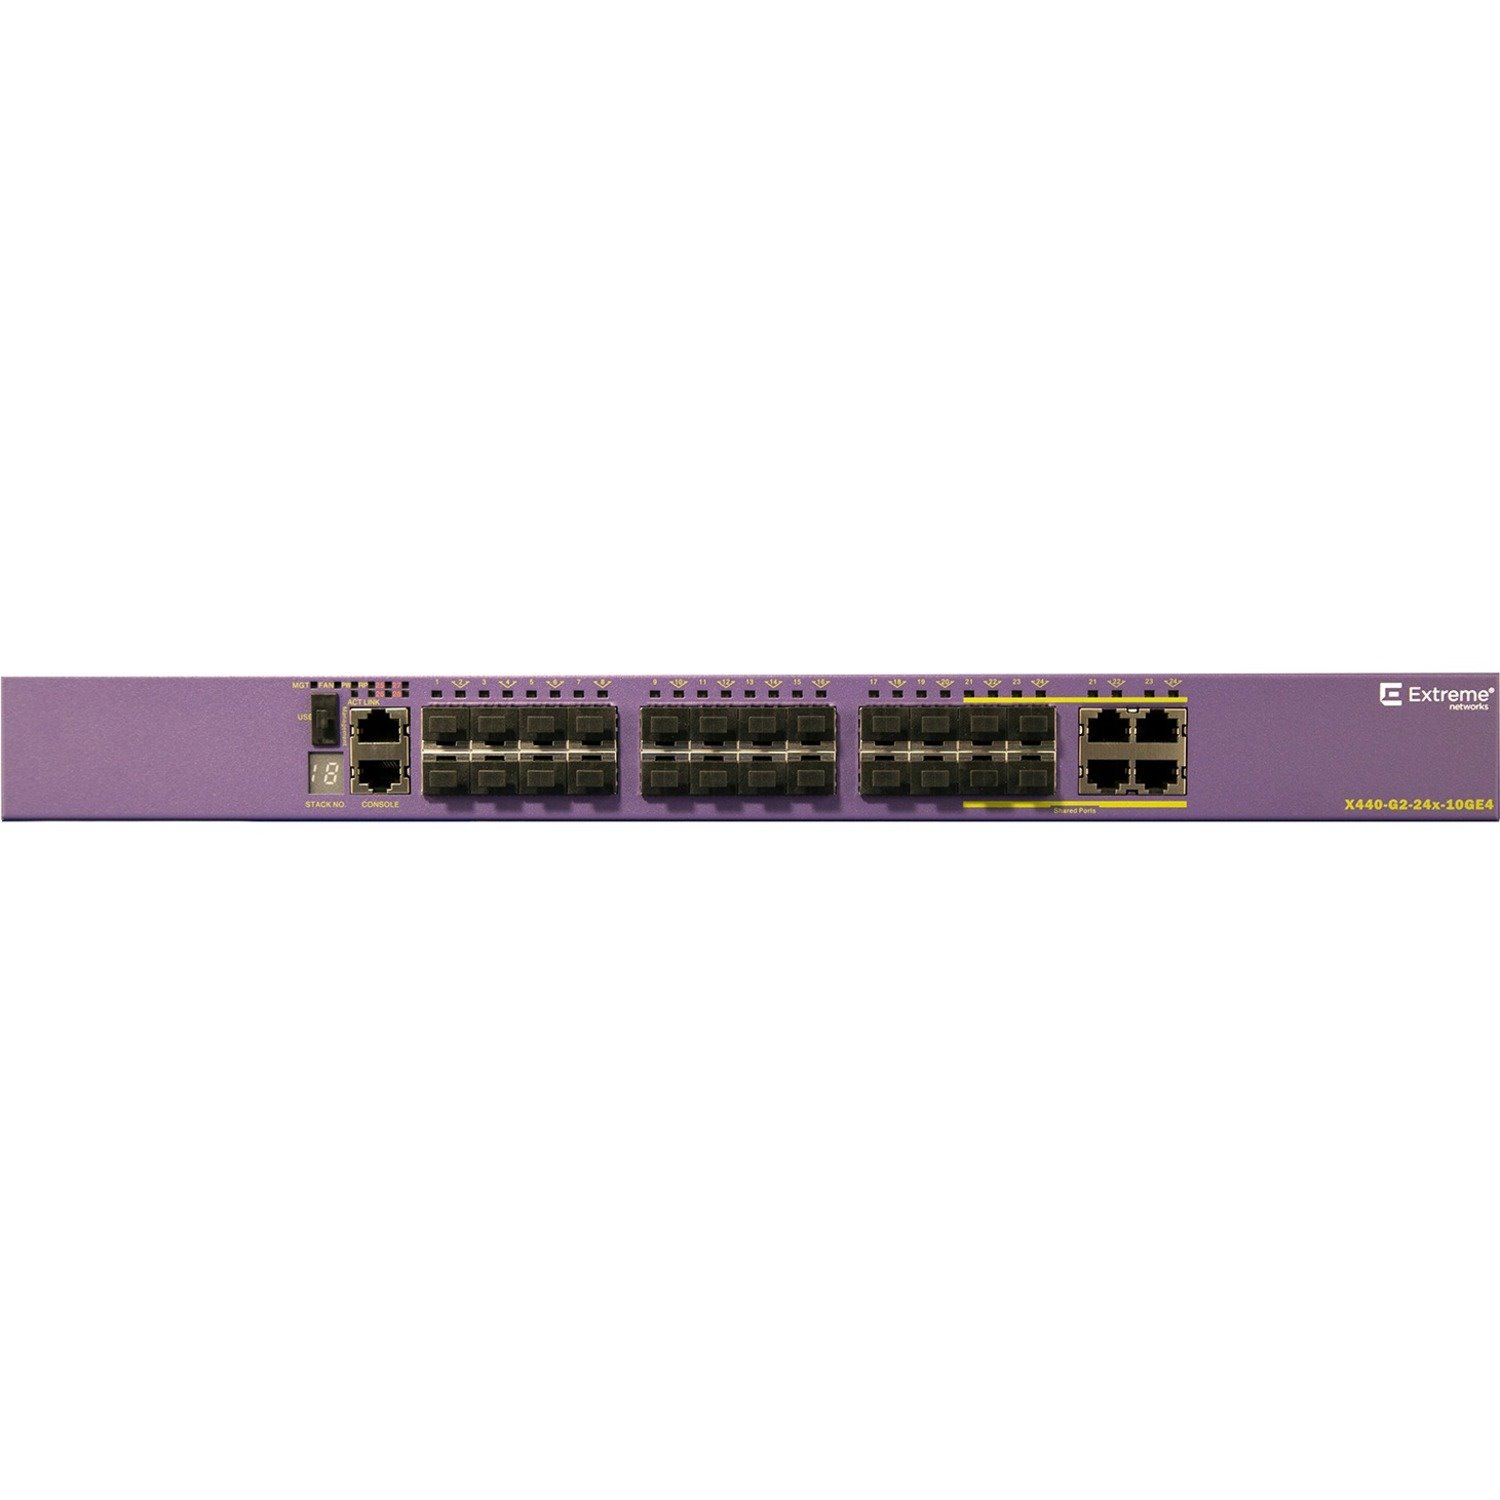 Extreme Networks X440-G2-24x-10GE4 Ethernet Switch